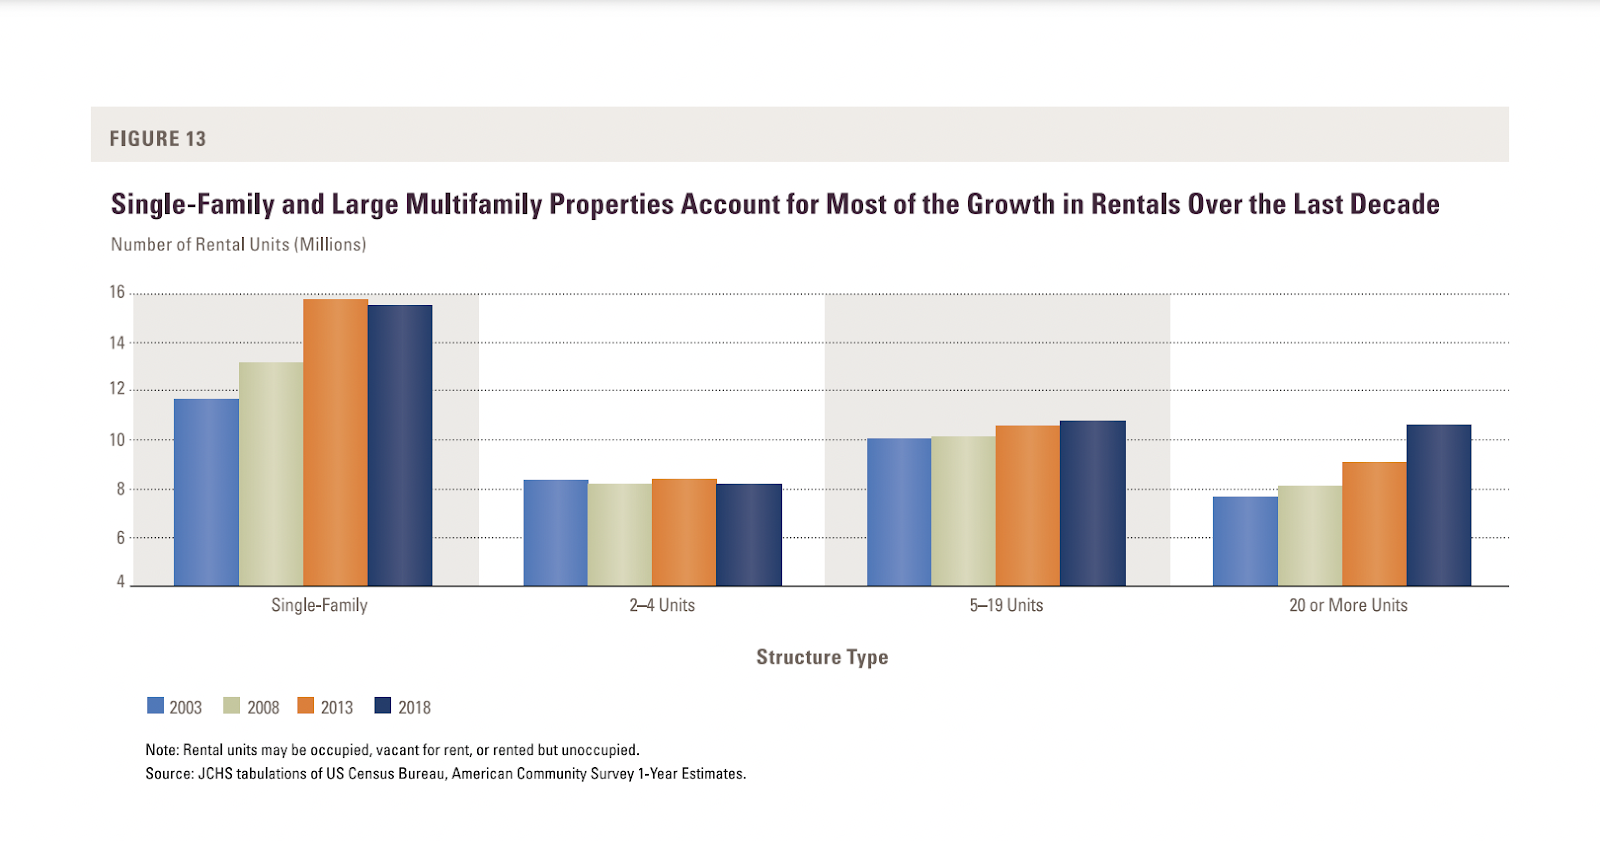 Bar graph showing that single-family and multifamily properties account for most of the growth in rentals over the last decade.